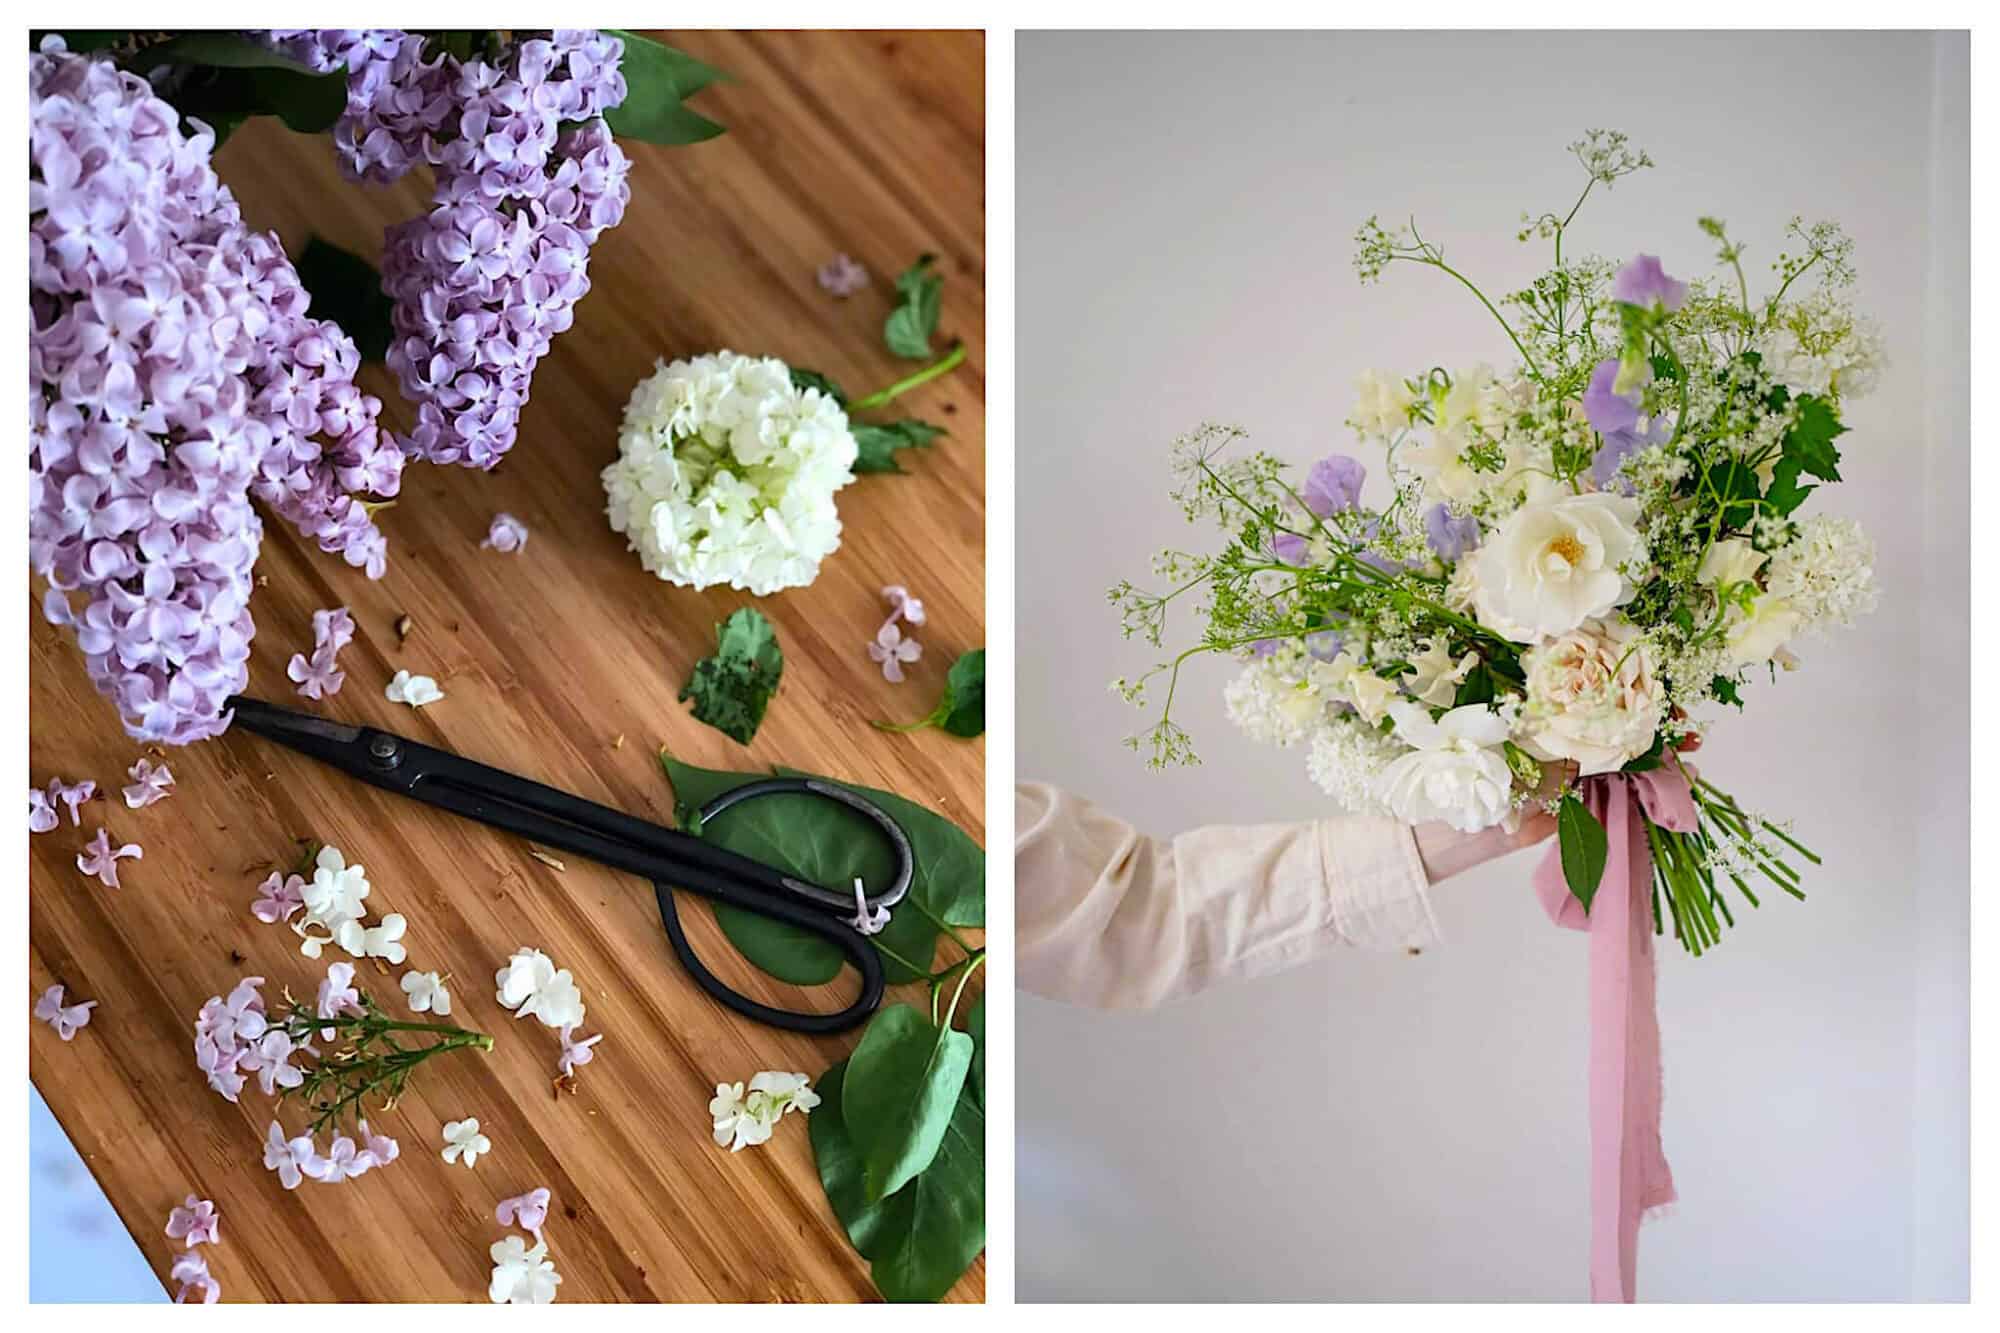 Left: A pair of scissors lays next to stems of purple and white hydrangea's ready to be made into a bouquet at PEONIES, Right: A woman holds a beautiful bouquet of white, purple and green flowers tied with a pink ribbon from PEONIES.  